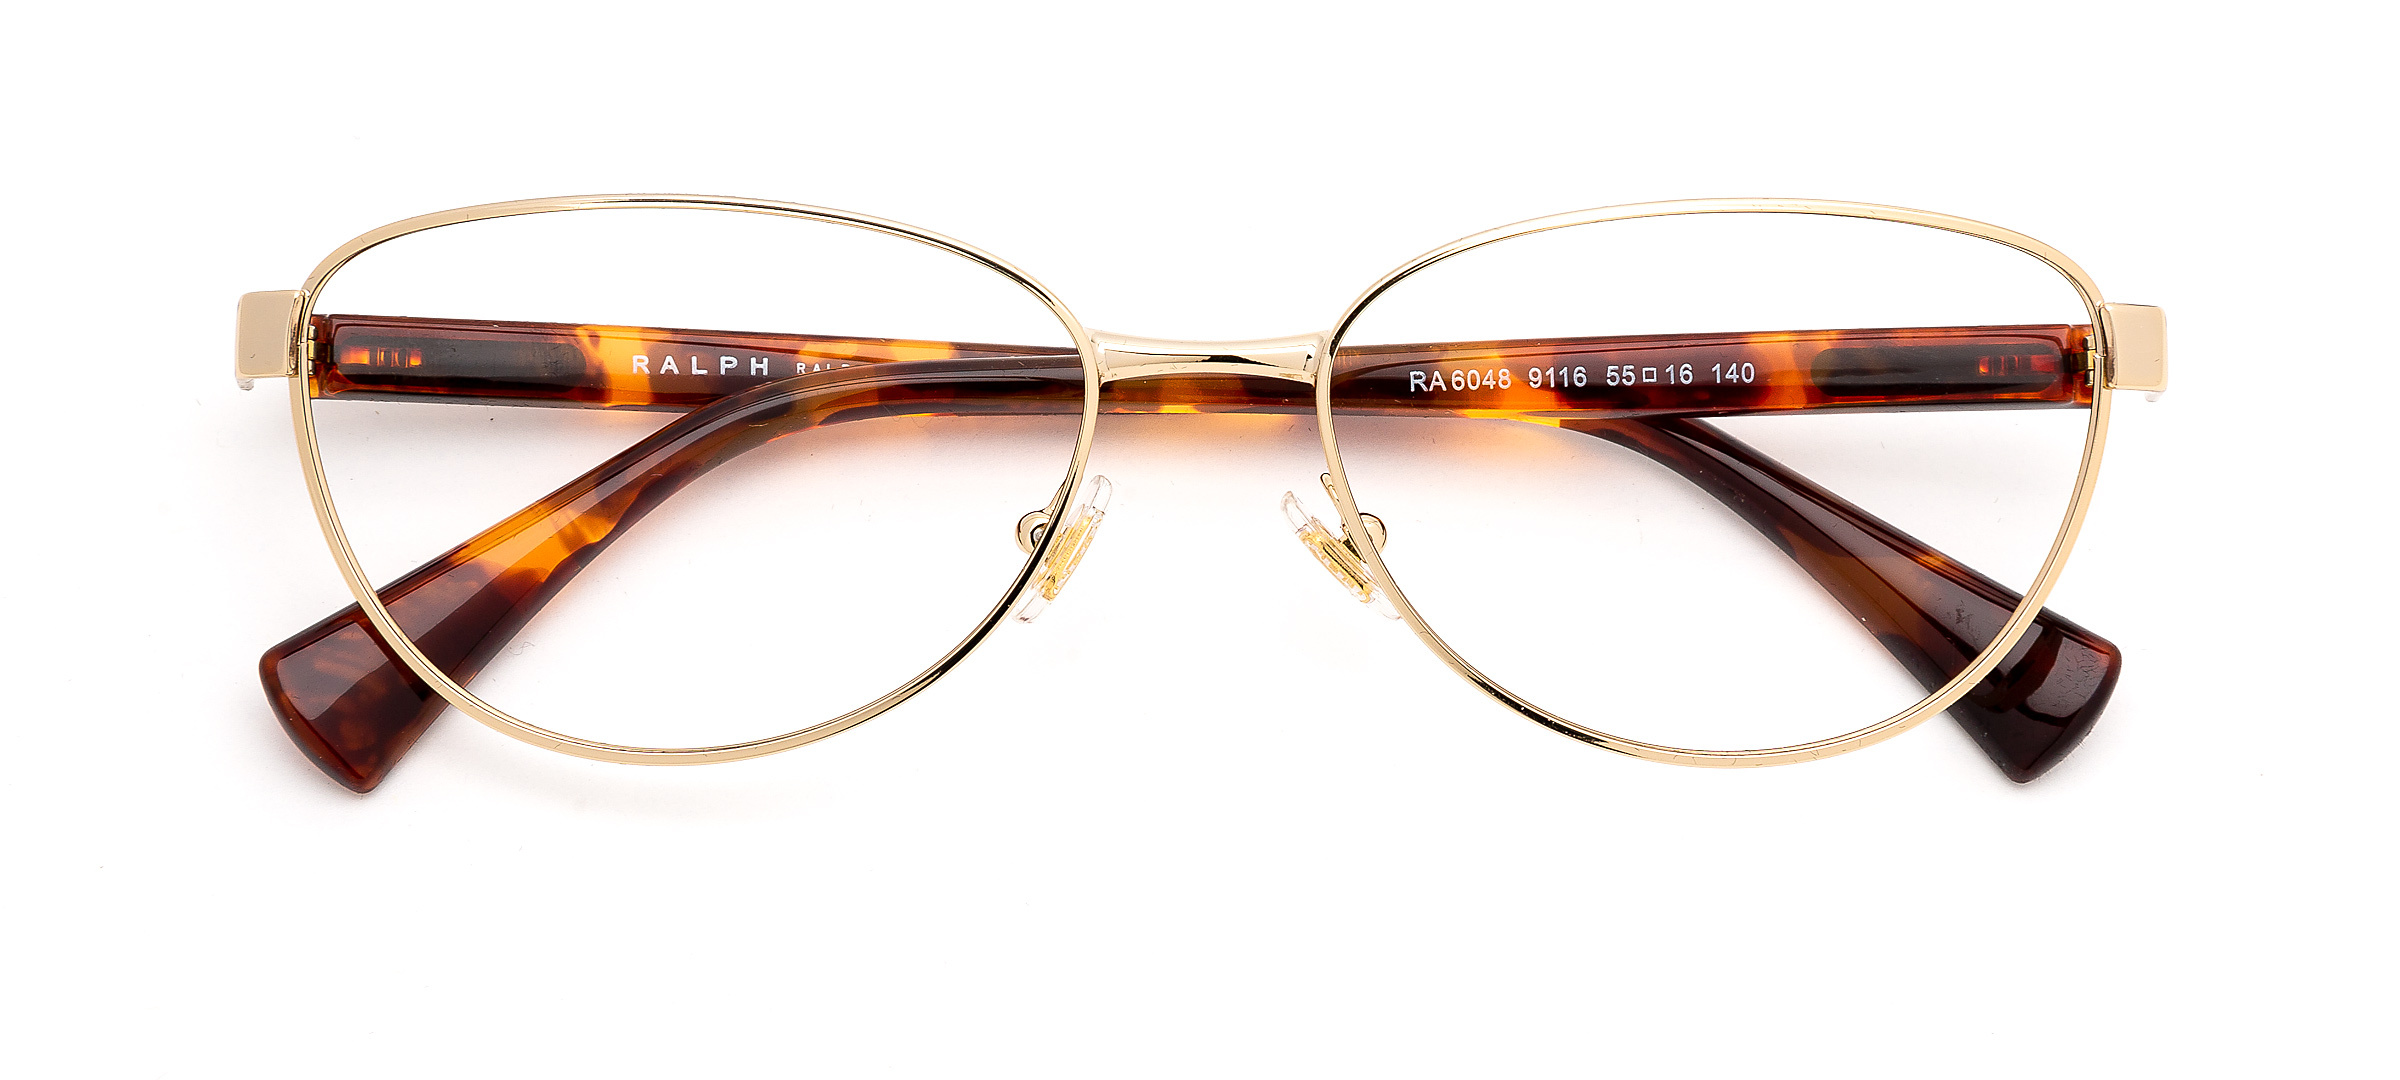 Ralph By Ralph Lauren Glasses for Men & Women | Clearly